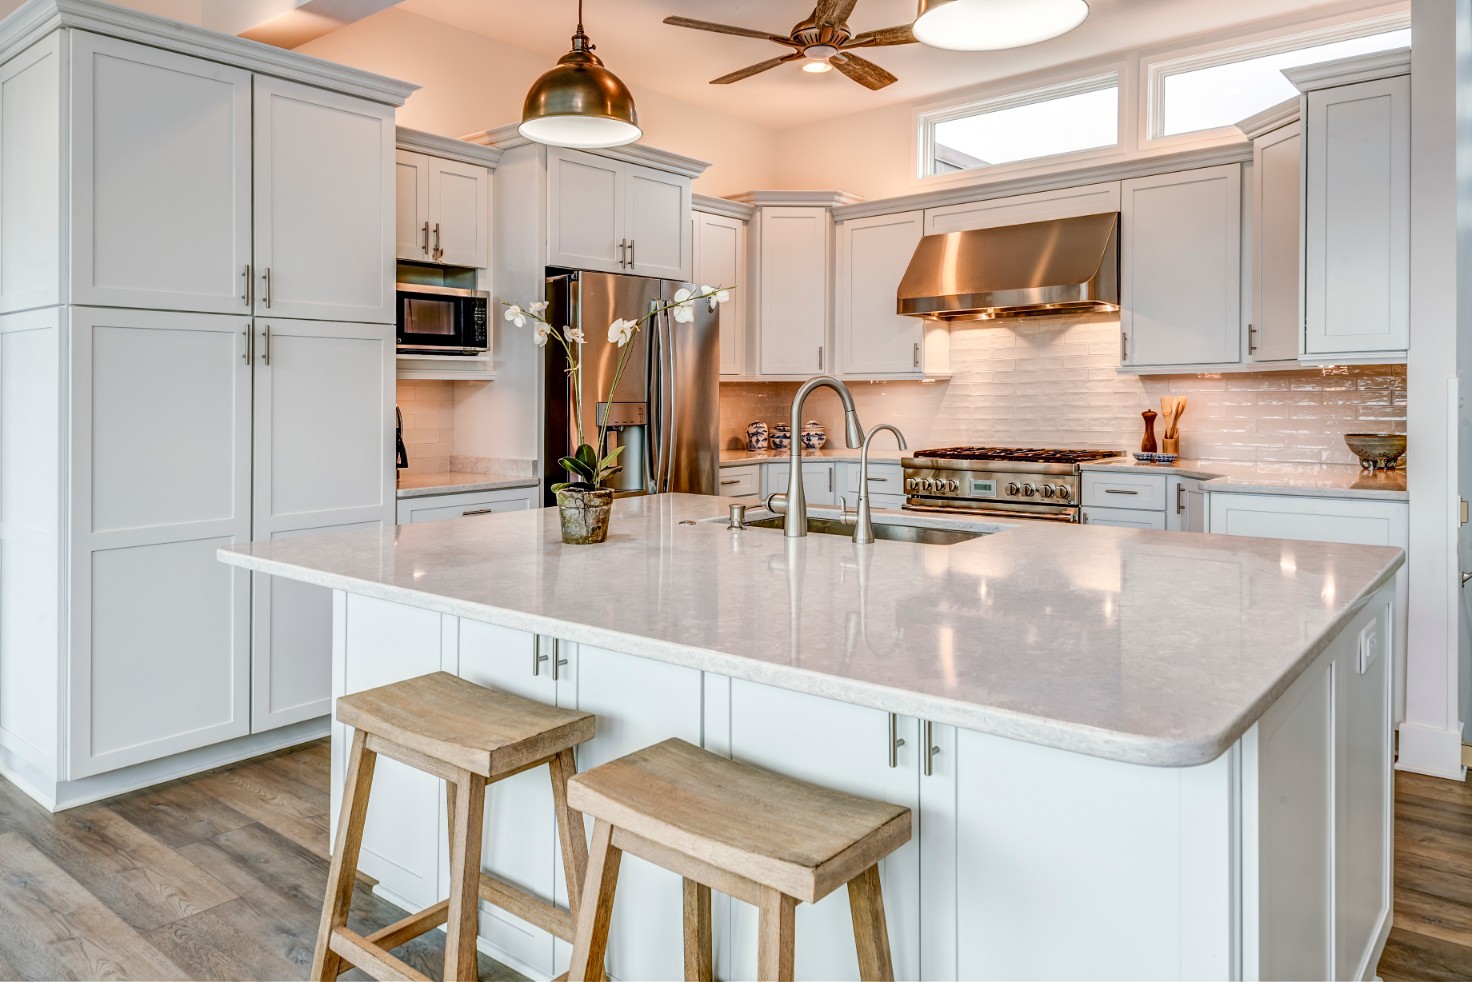 Cotton Patch Hills Kitchen Remodel in Bethany Beach DE with White Center Island with White Countertop